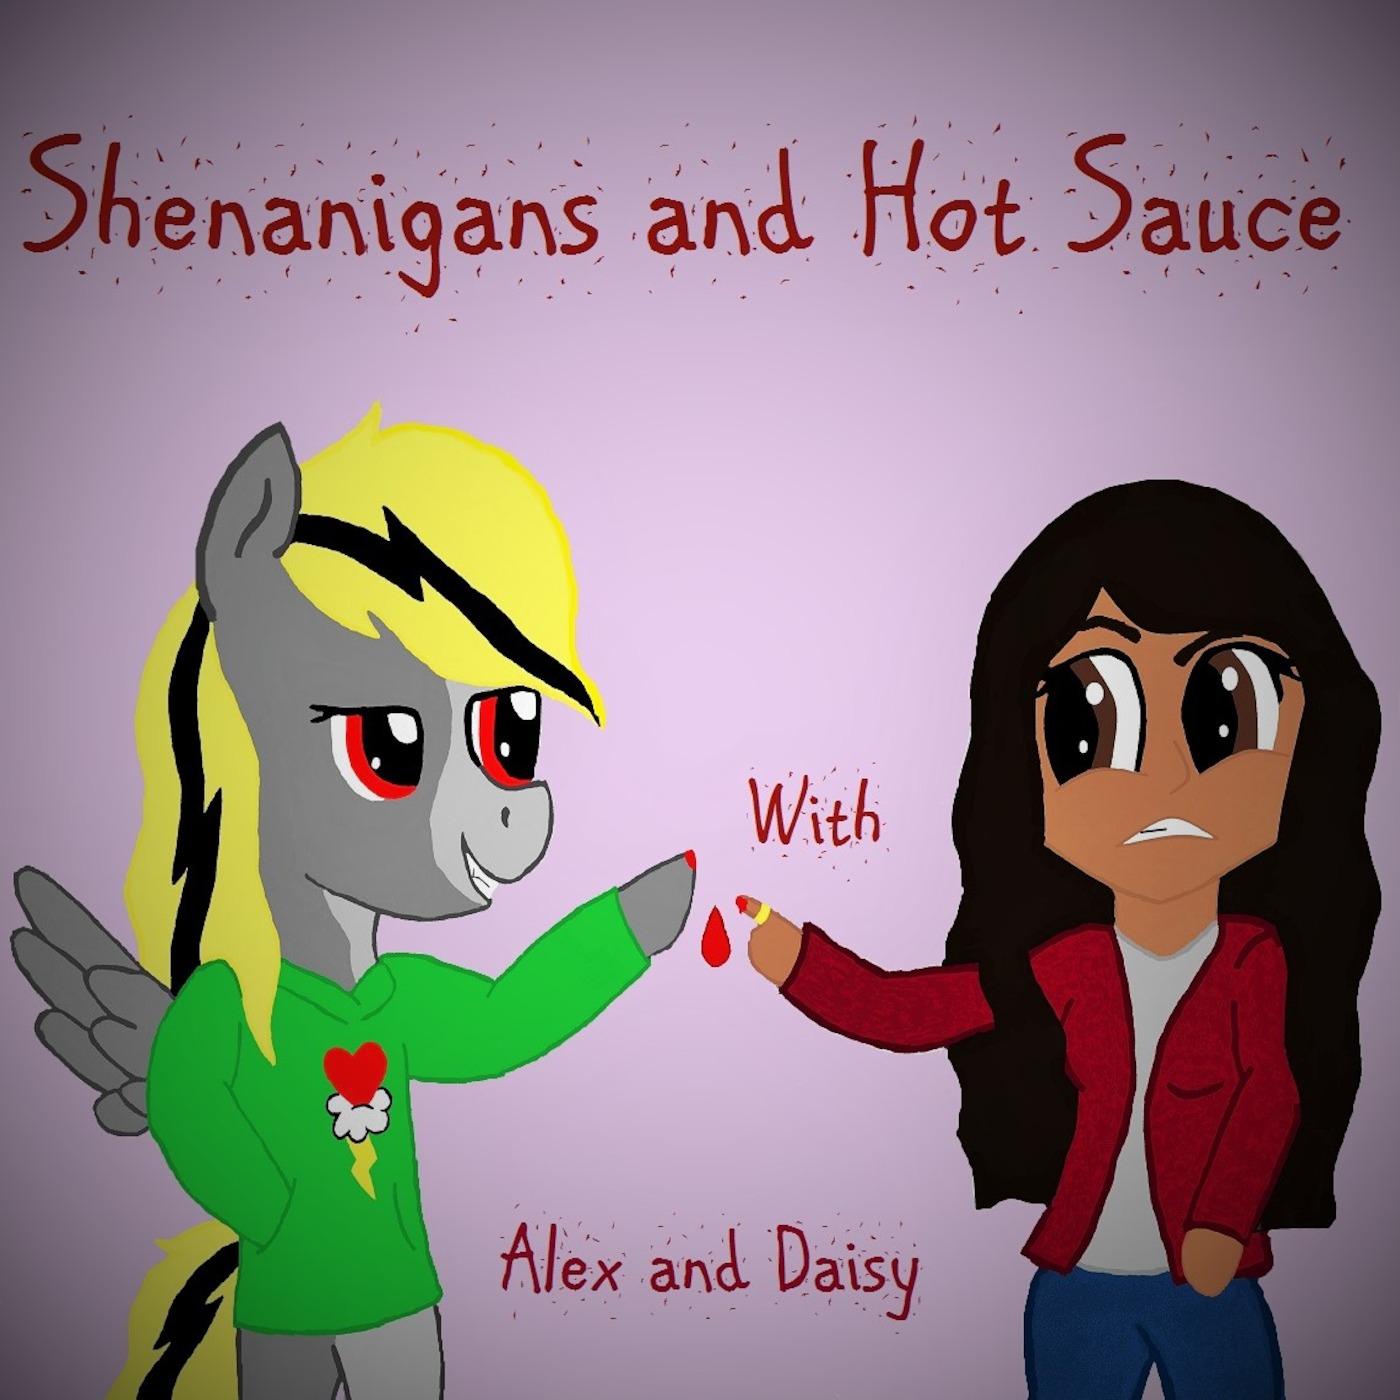 Shenanigans and Hot Sauce